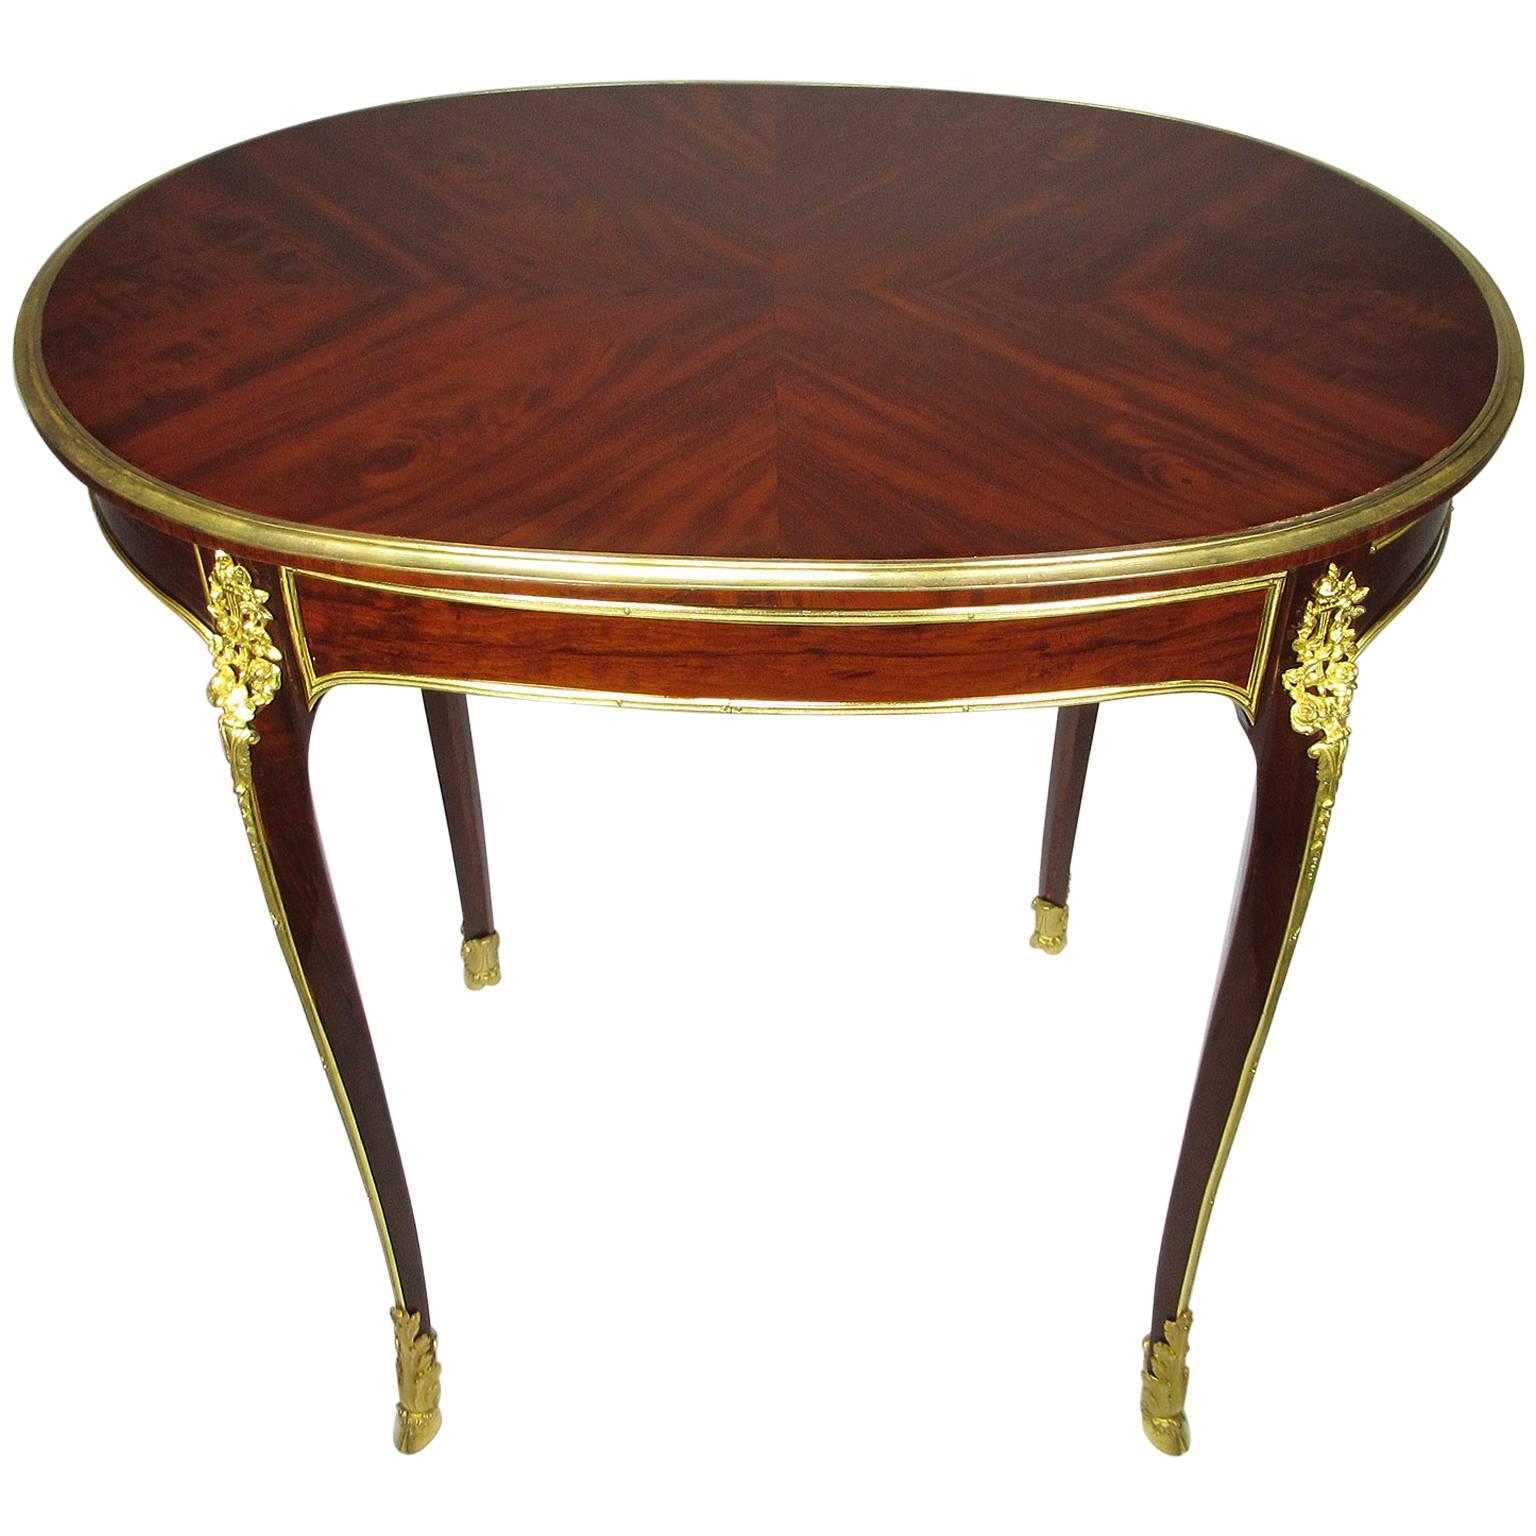 French 19th-20th Century Louis XV Style Ormolu-Mounted Mahogany Table Attr Linke For Sale